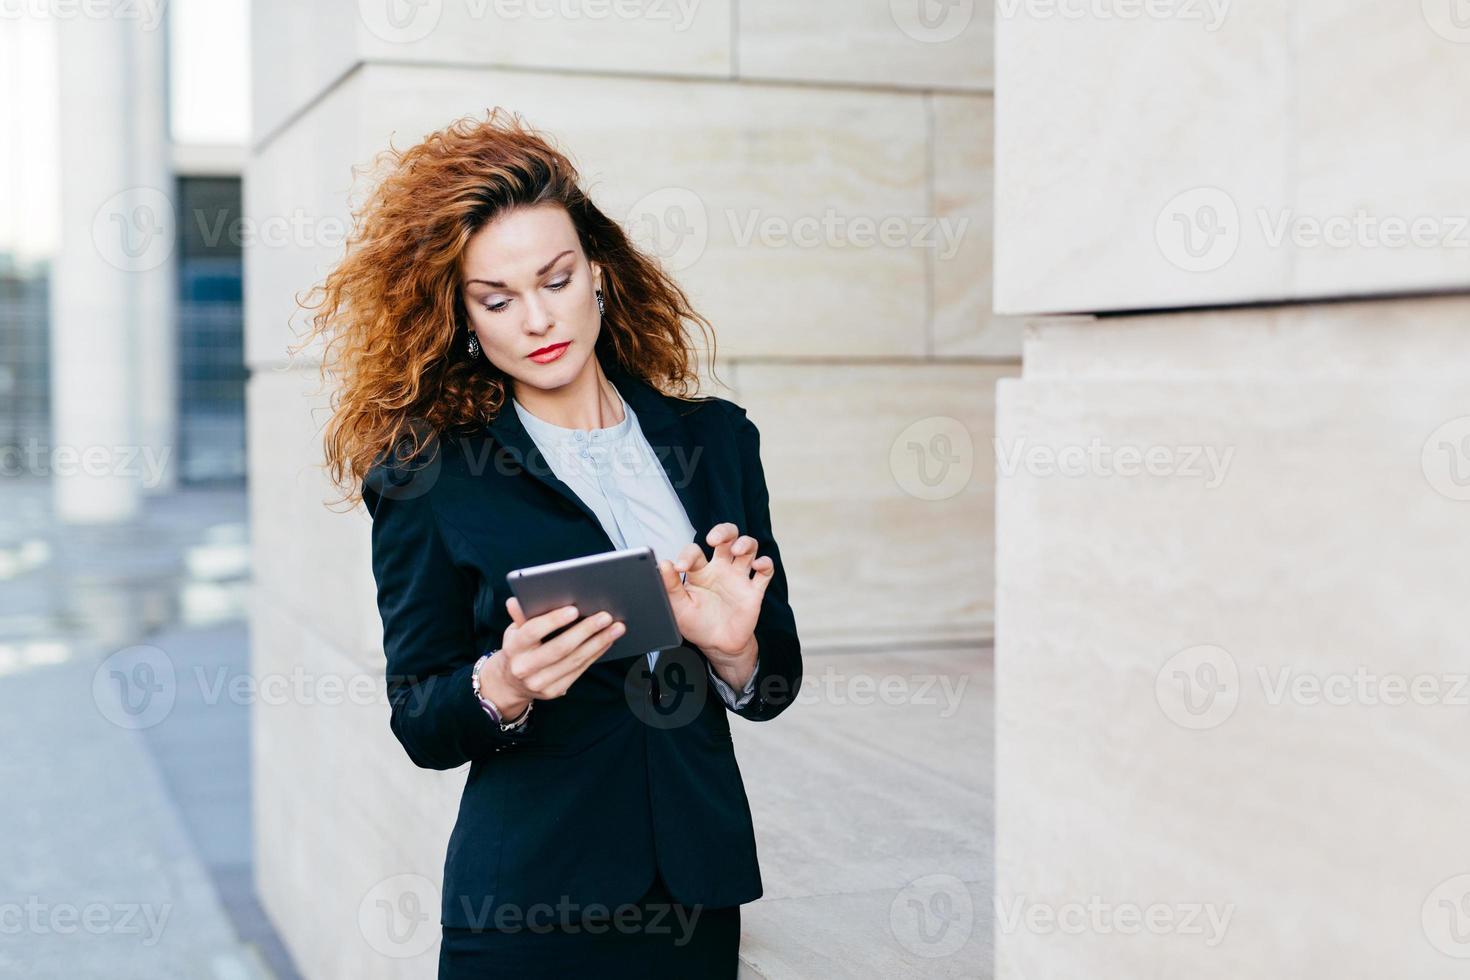 Elegant lady with curly hair, wearing black suit, typing messages or making business report while using tablet computer. Female entrepreneur working on new business project. Business and career photo